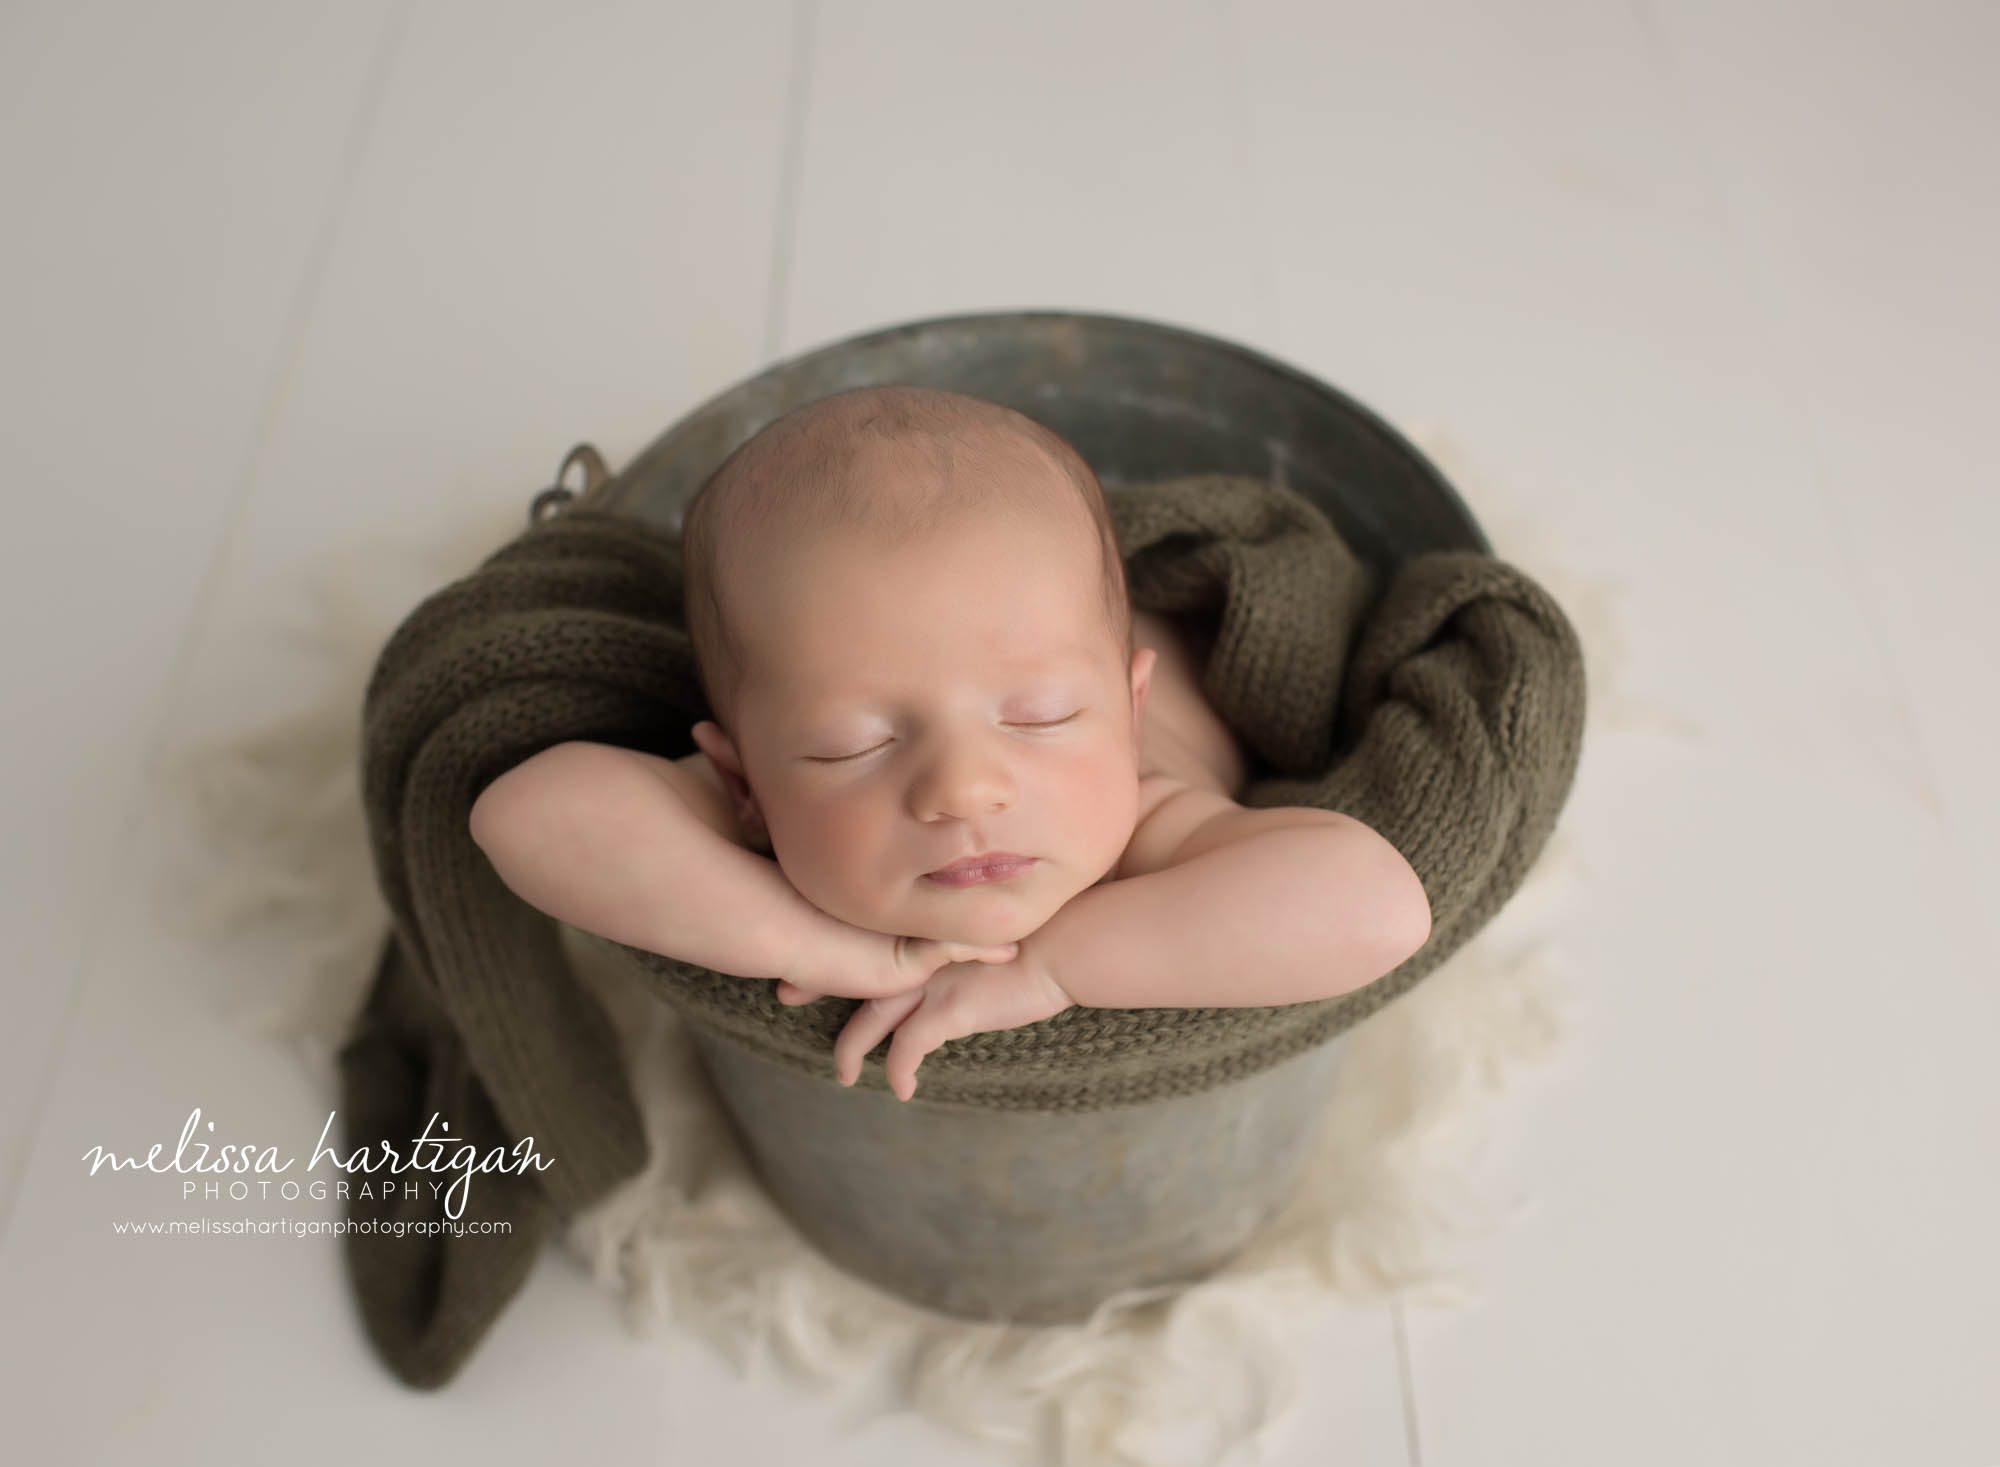 newborn baby boy posed in metal bucket with green knitted wrap layer